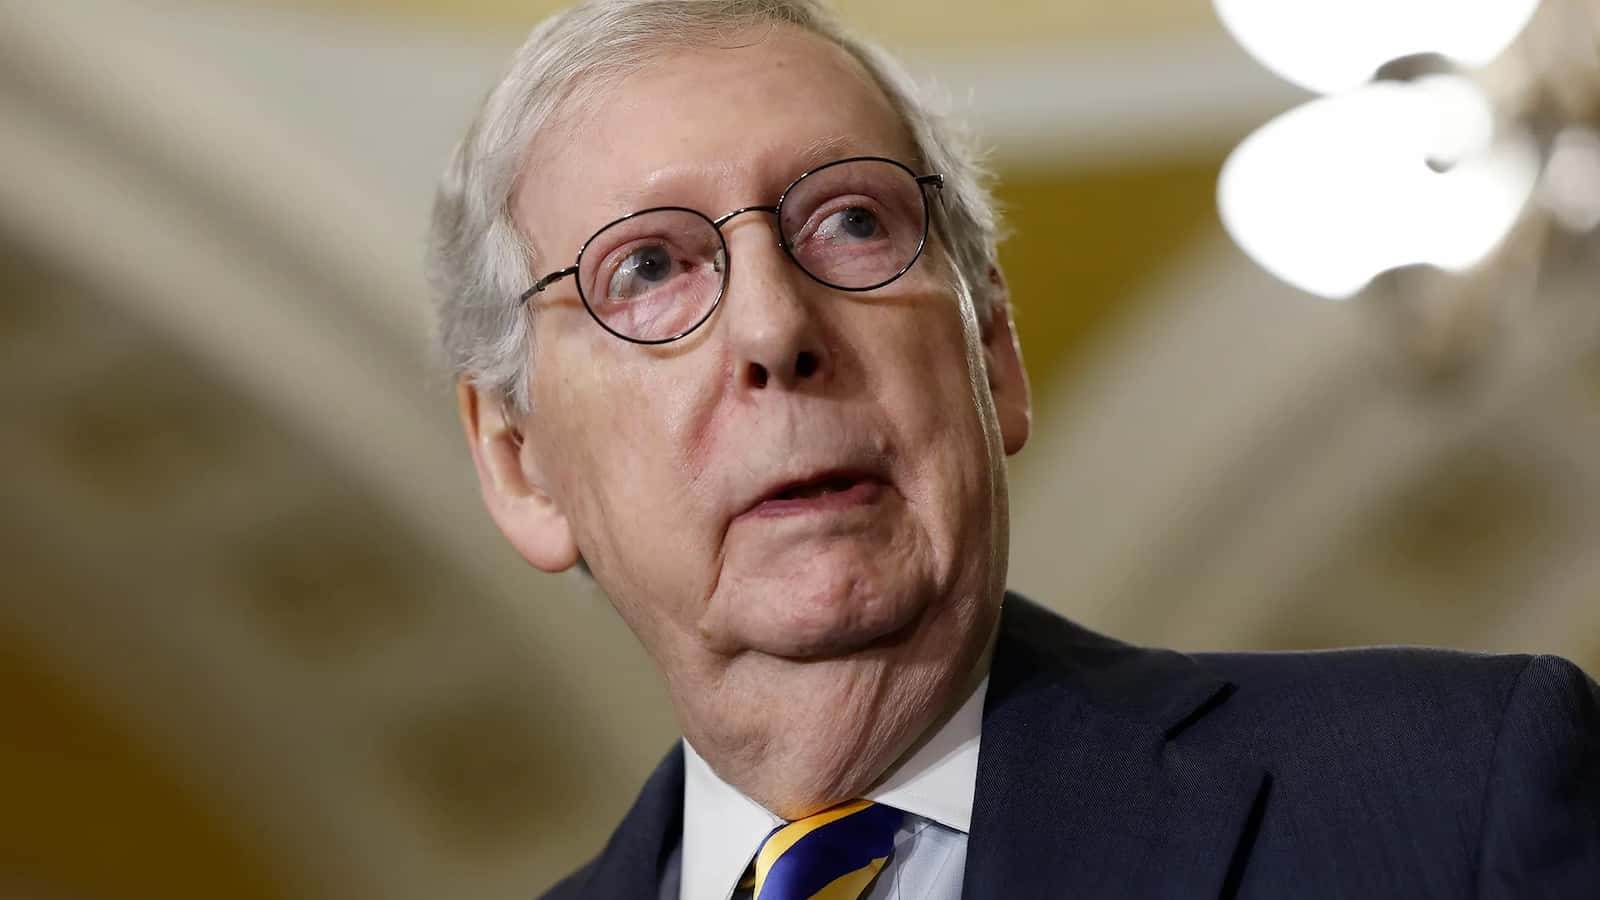 Mitch McConnell Biography: Age, Birthday, Personal Life, Career, Controversy, Net Worth